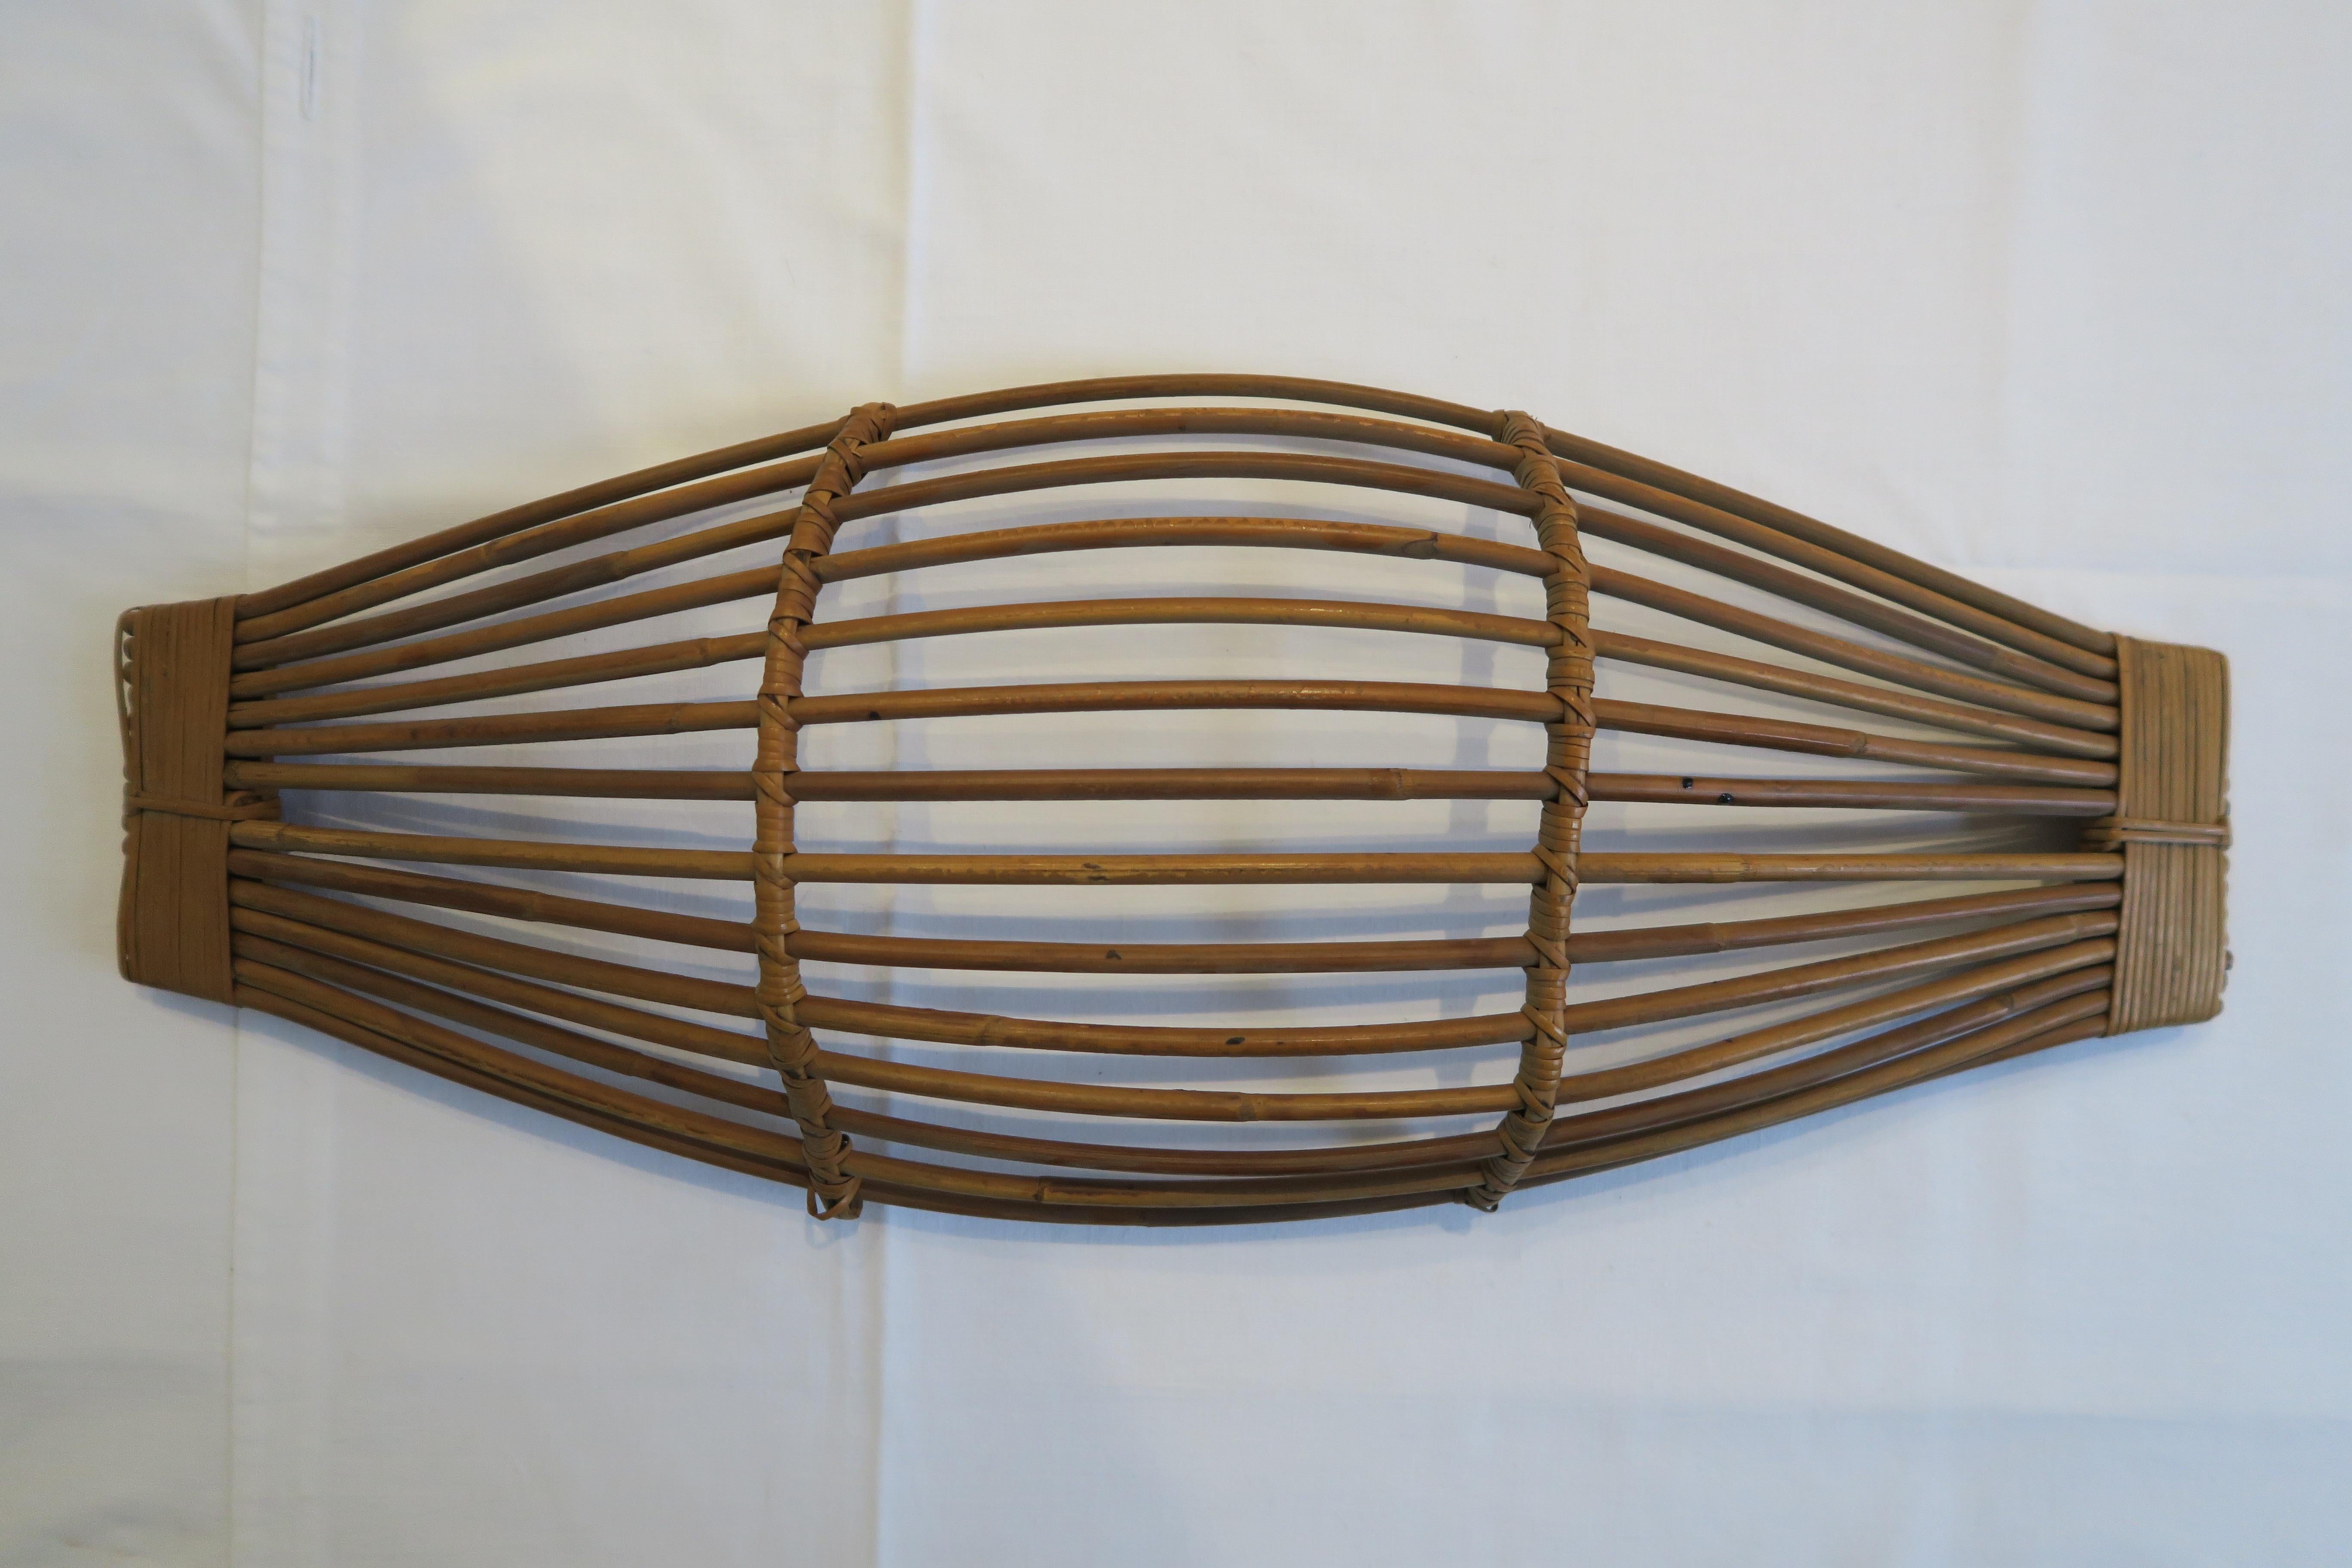 20th Century Extra rare Streamlined Fruit Basket Made from Wicker Designed by Carl Auböck